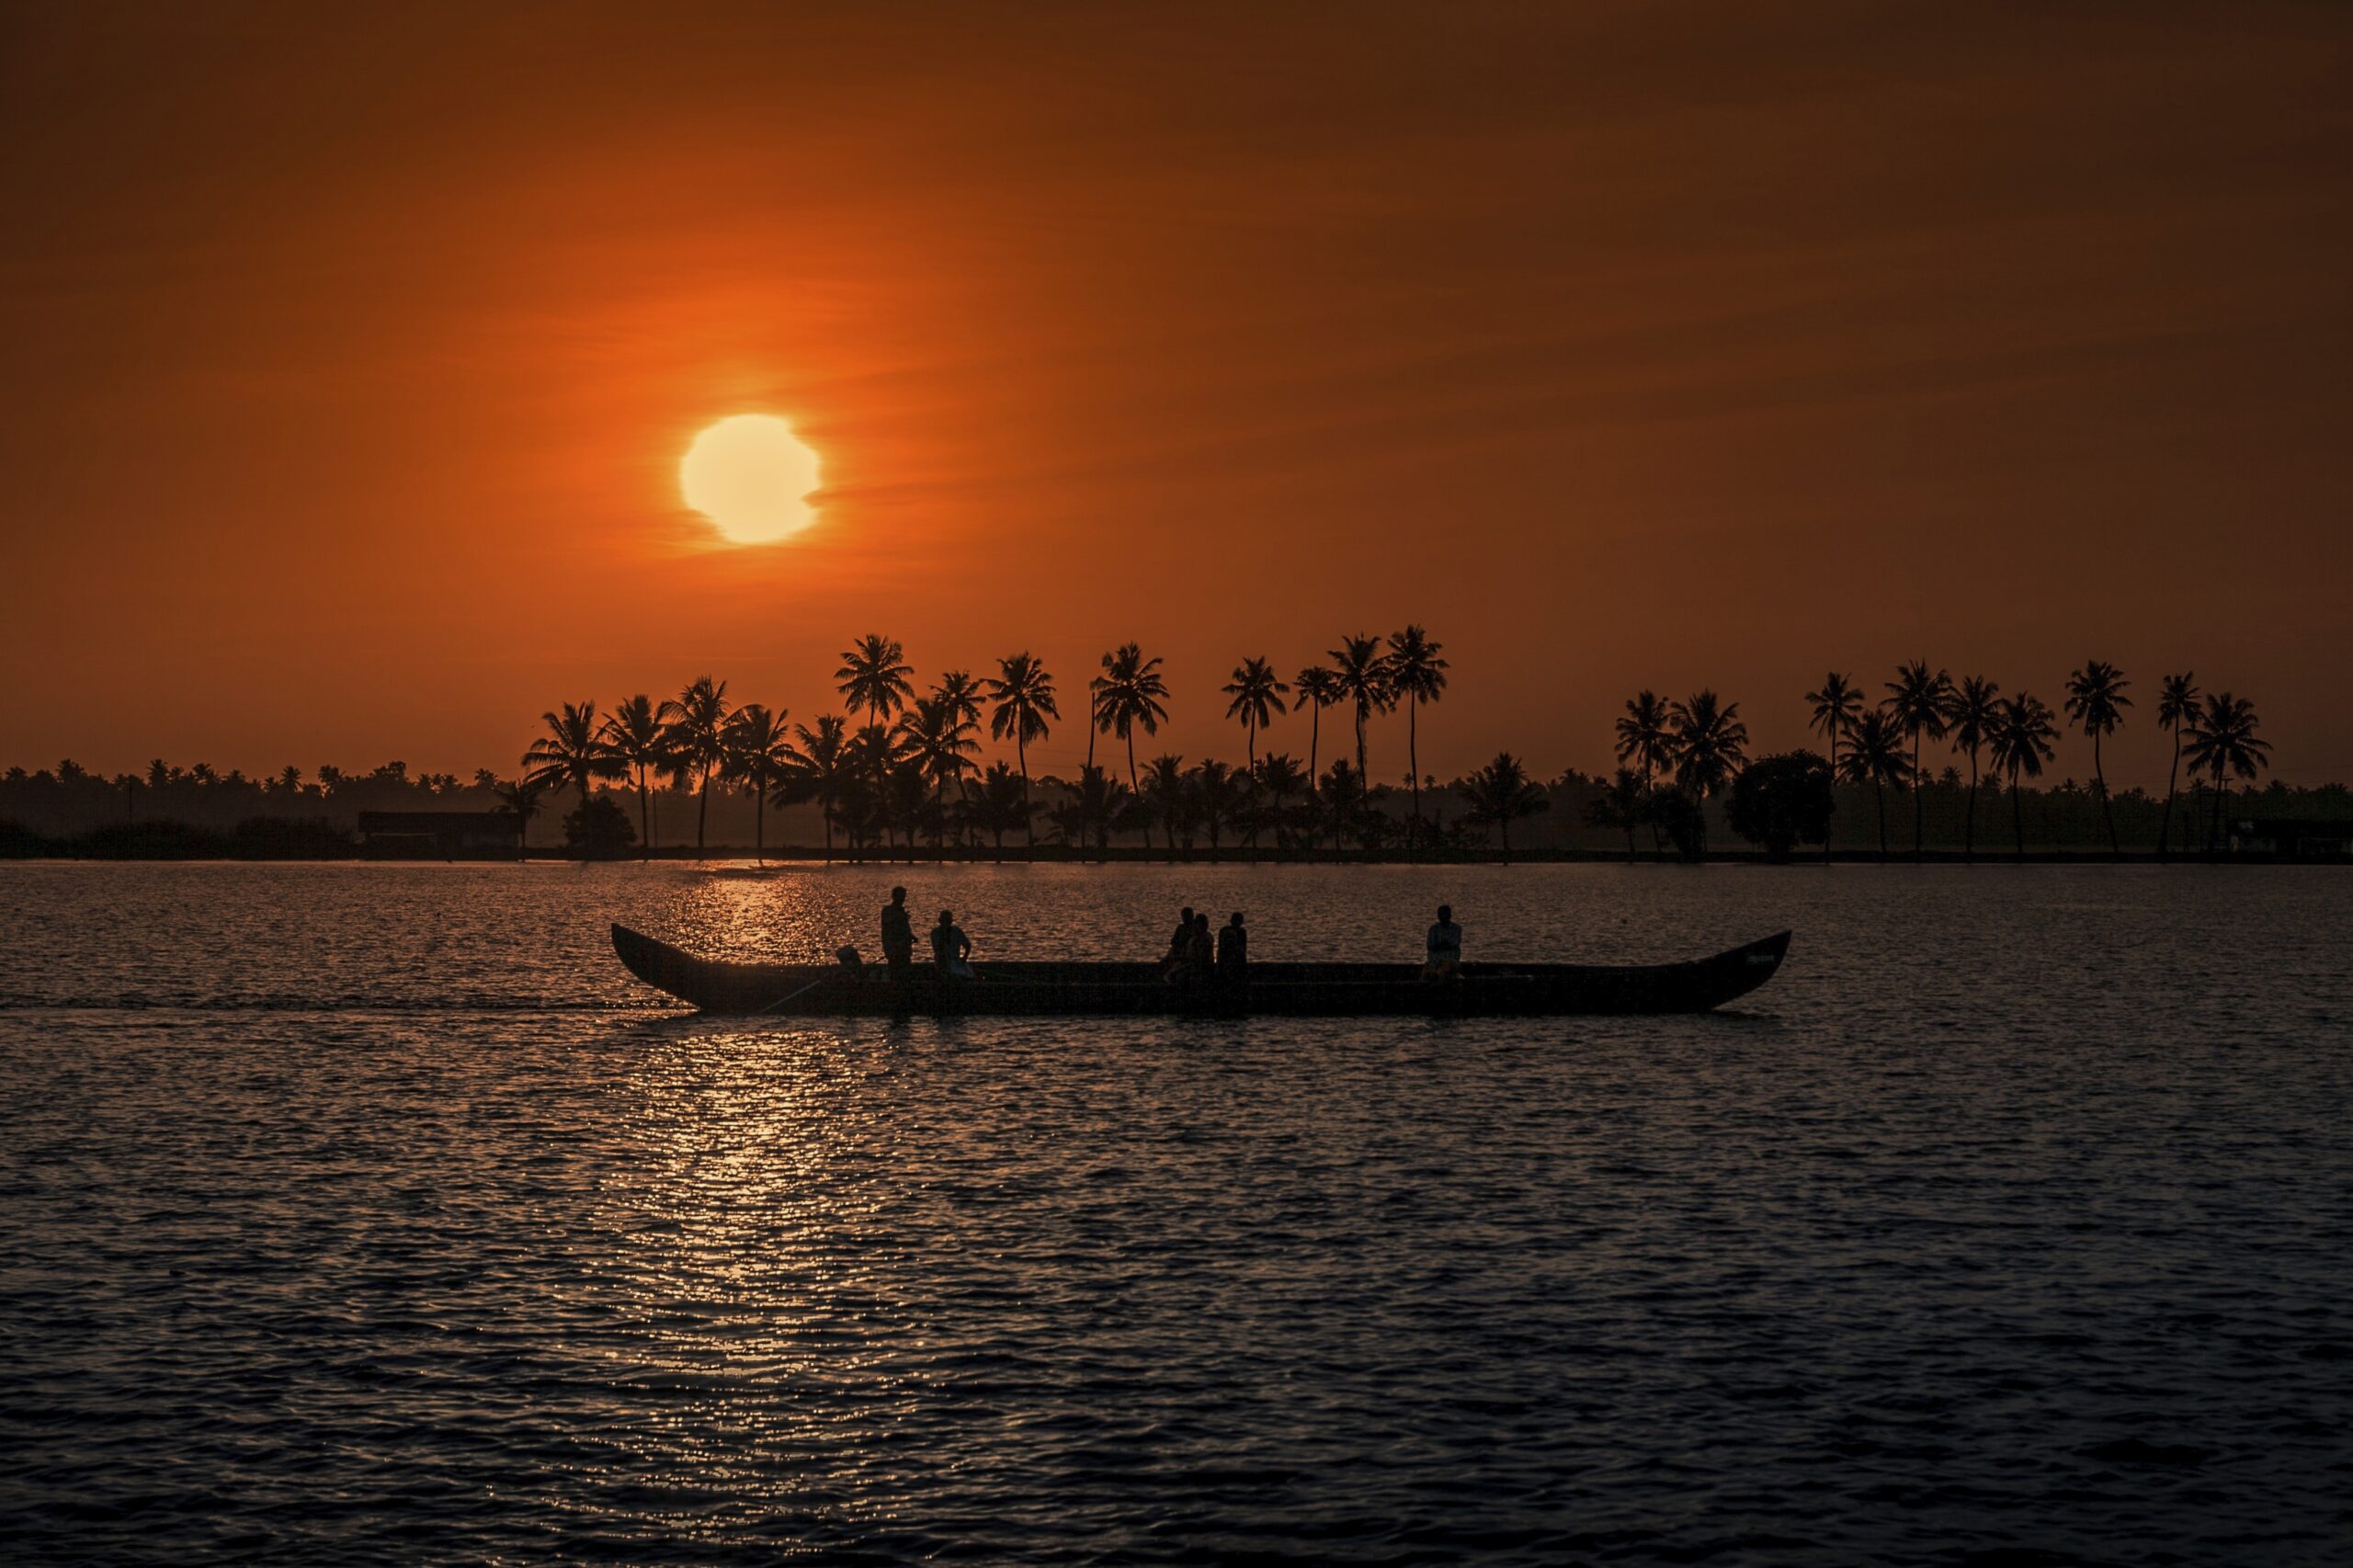 Holiday in Alleppey – A Worthy Visiting Holiday Destination.